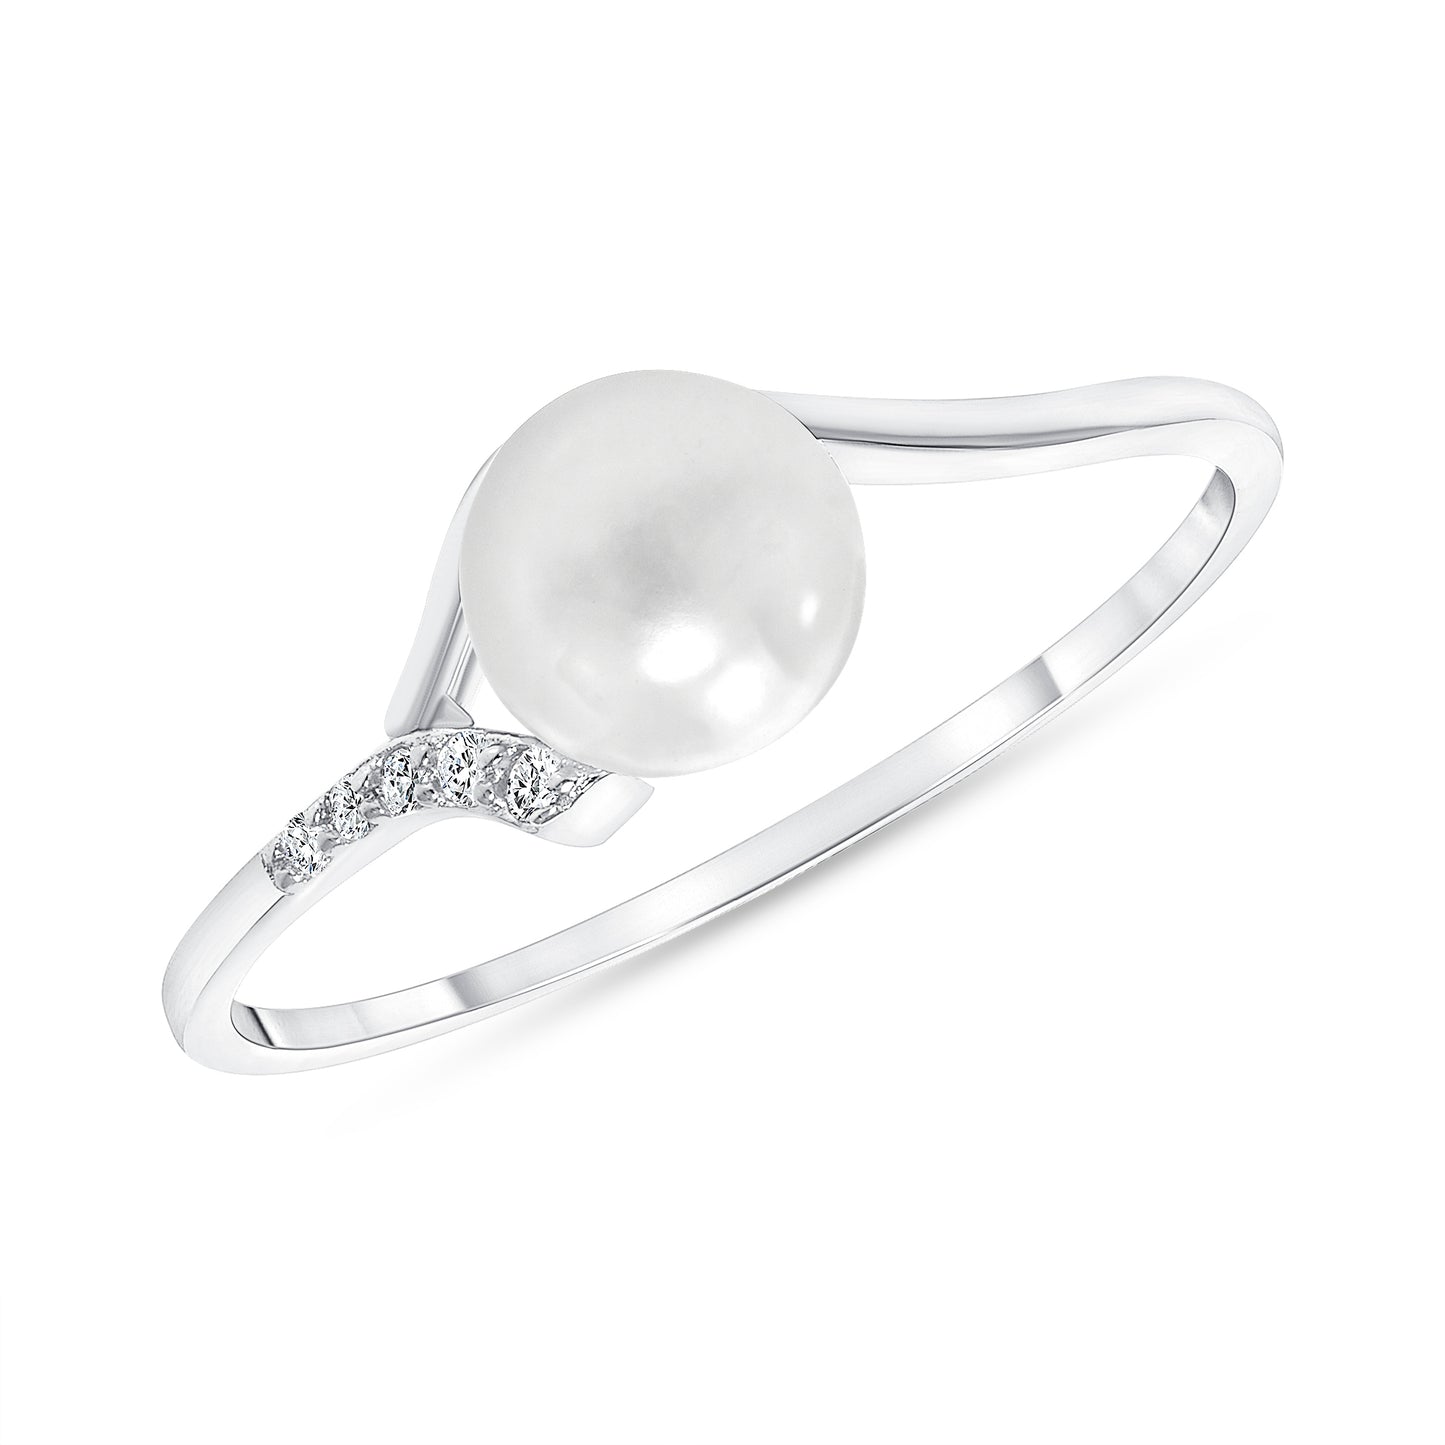 Silver 925 Rhodium Plated Plain Pearl and Solitaire Ring. GR8883